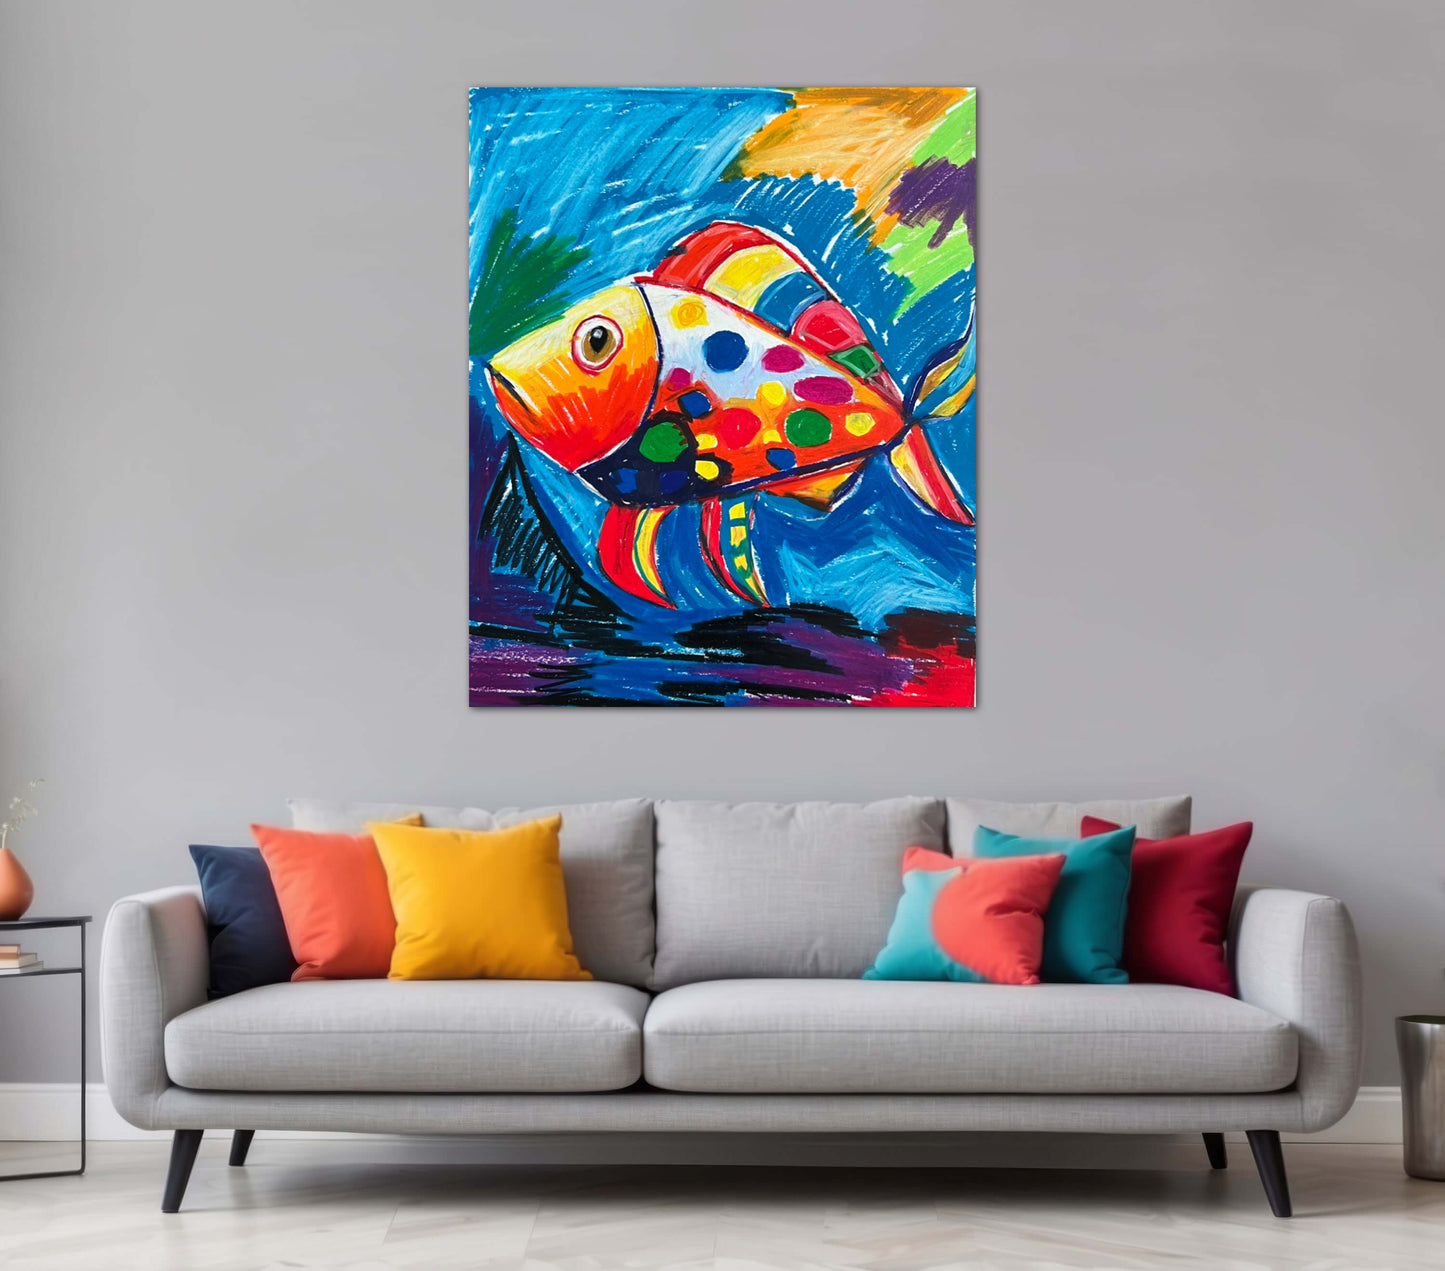 The Colorful Fish - Print, Poster, Stretched Canvas Print